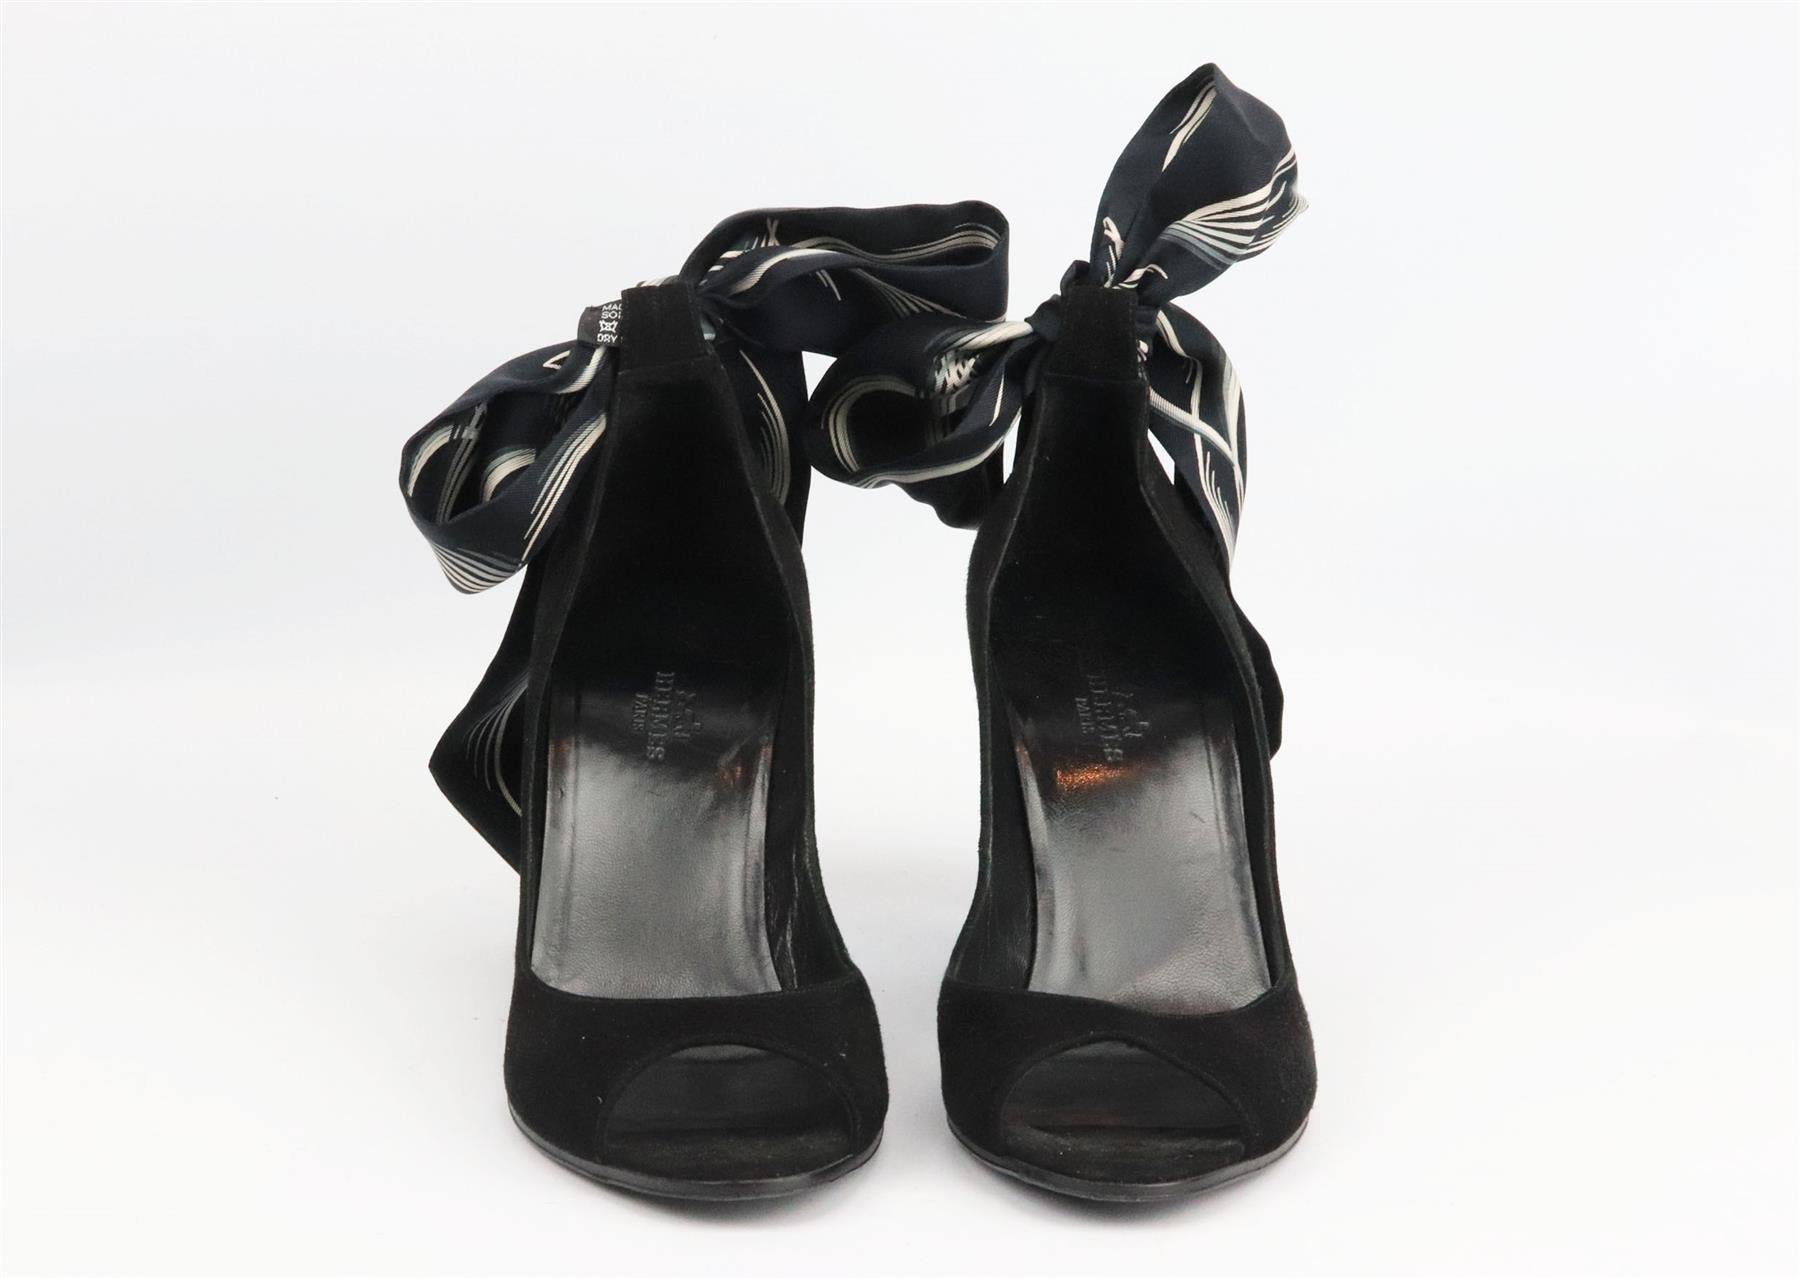 These sandals by Hermès have been made in Italy from black suede, they're set on a structured wedge heel that's balanced with the brand’s iconic silk printed twilly ankle strap with peep toe. Heel measures approximately 89 mm/ 3.5 inches. Black